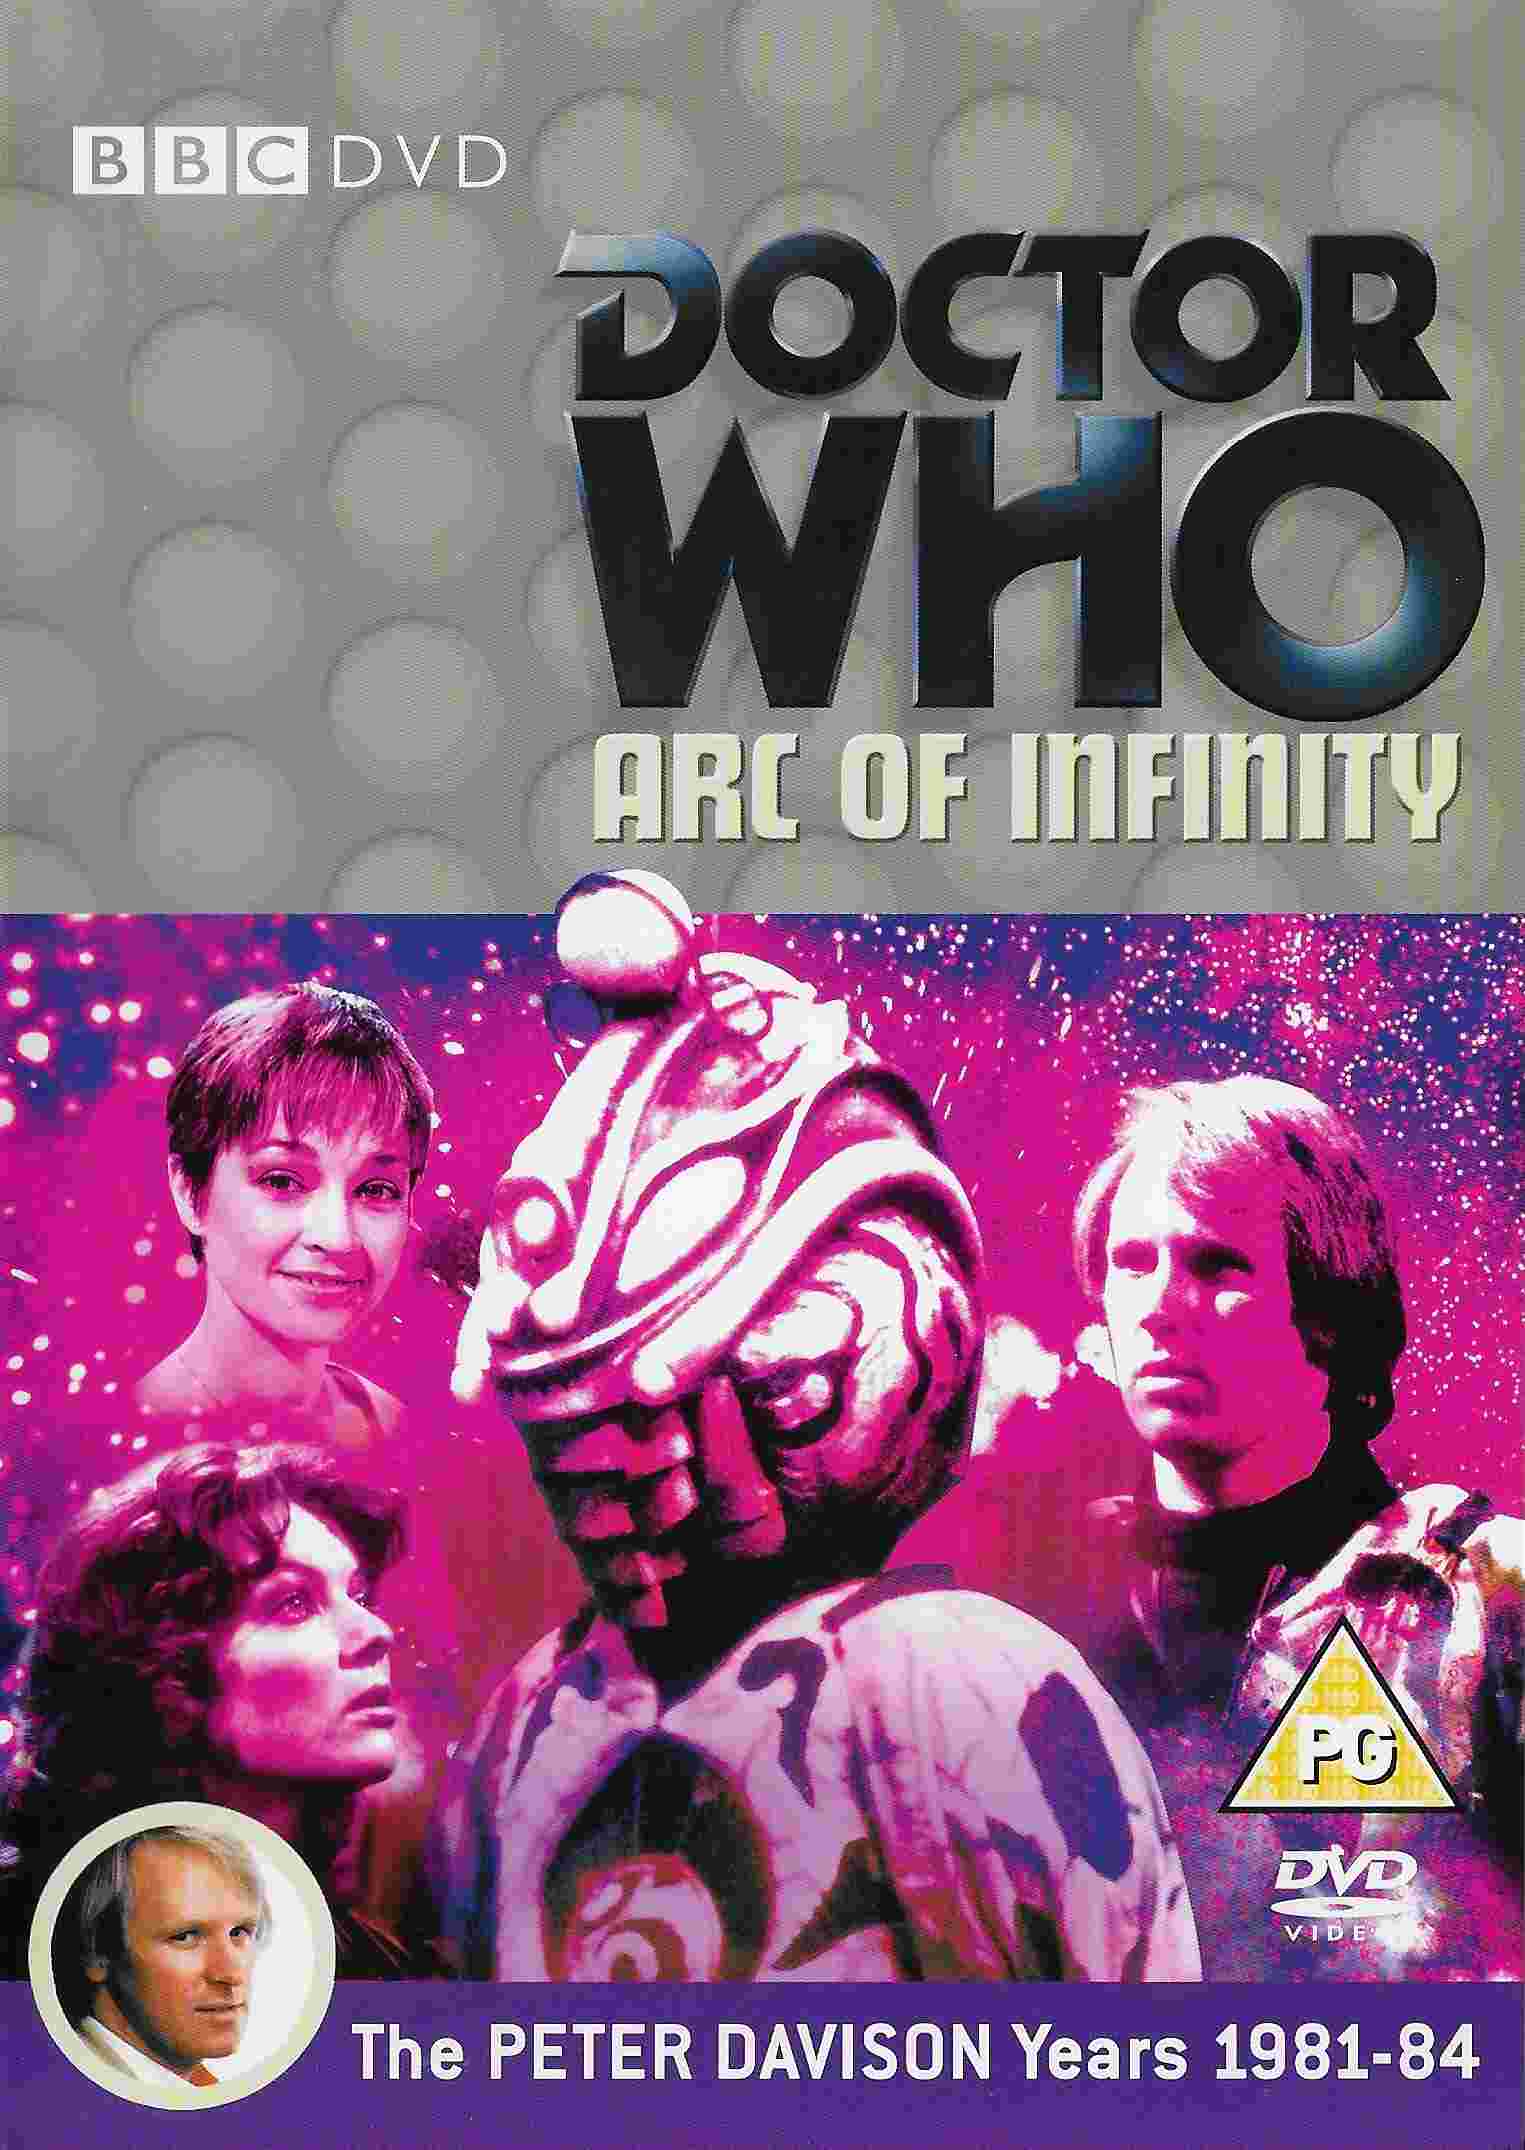 Picture of BBCDVD 2327B Doctor Who - Arc of infinity by artist Johnny Byrne from the BBC dvds - Records and Tapes library